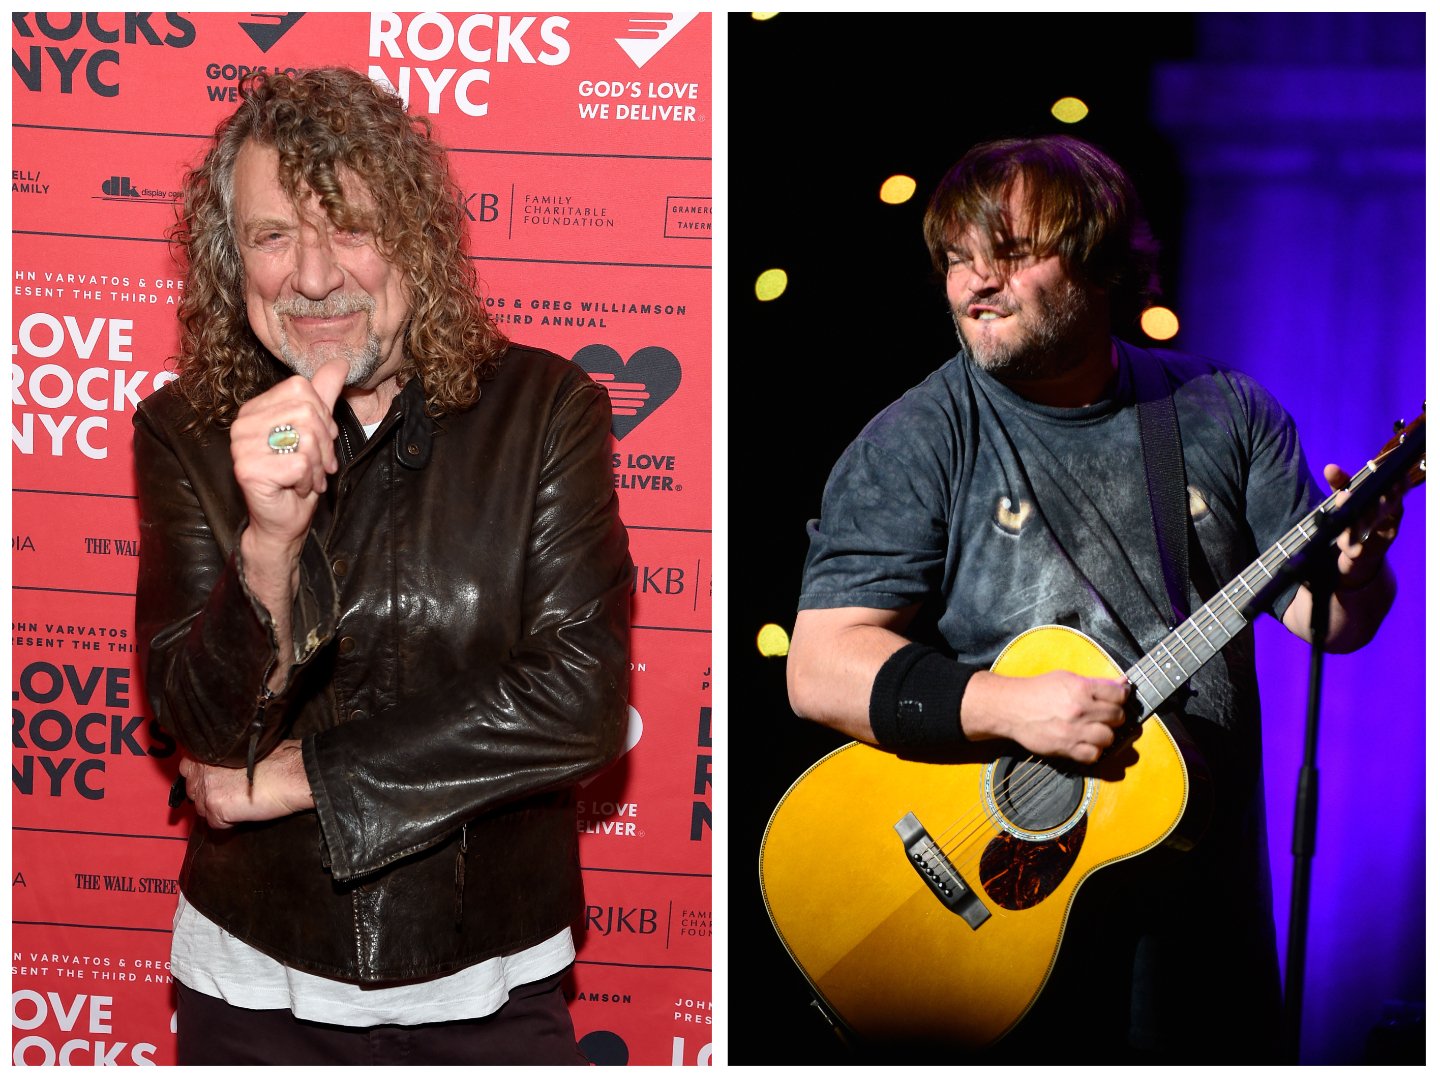 Robert Plant Said Jack Black Made a 'Magnificent Meal' Out of Led Zeppelin  in 'School of Rock